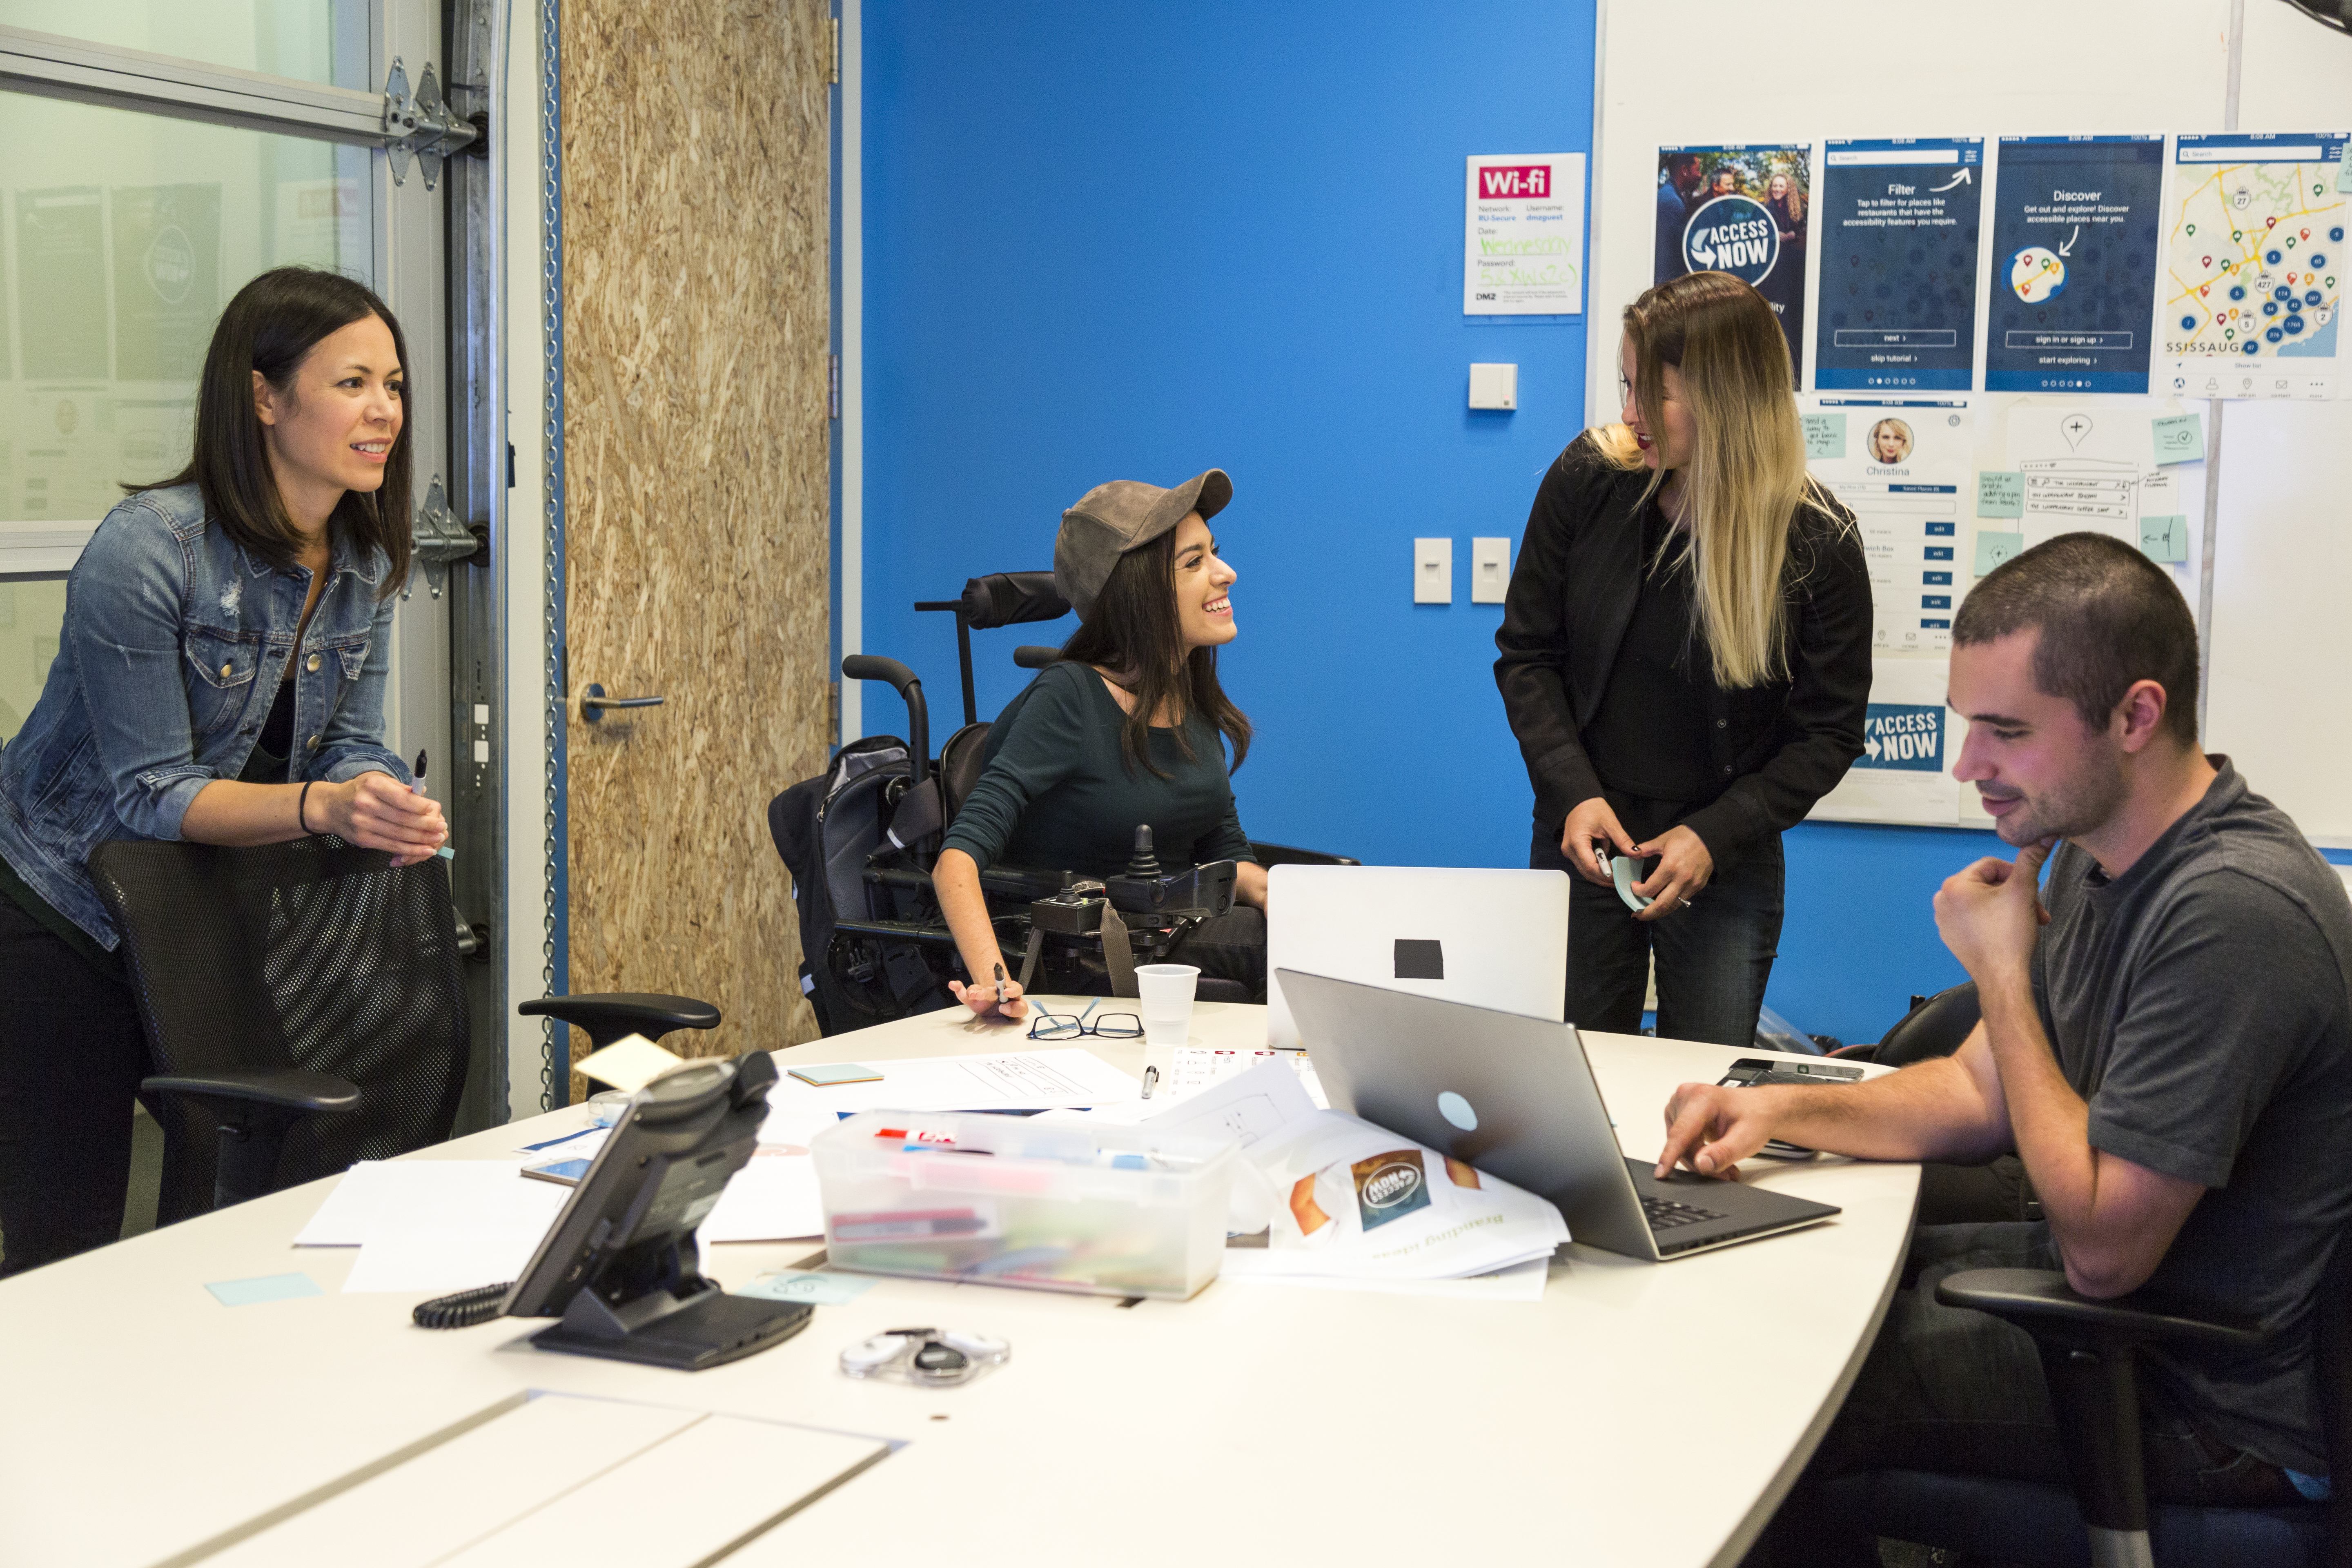 The access now team at the office. Eiko on the left, followed by Maayan ziv, amy shea, and nick schoenhoff.